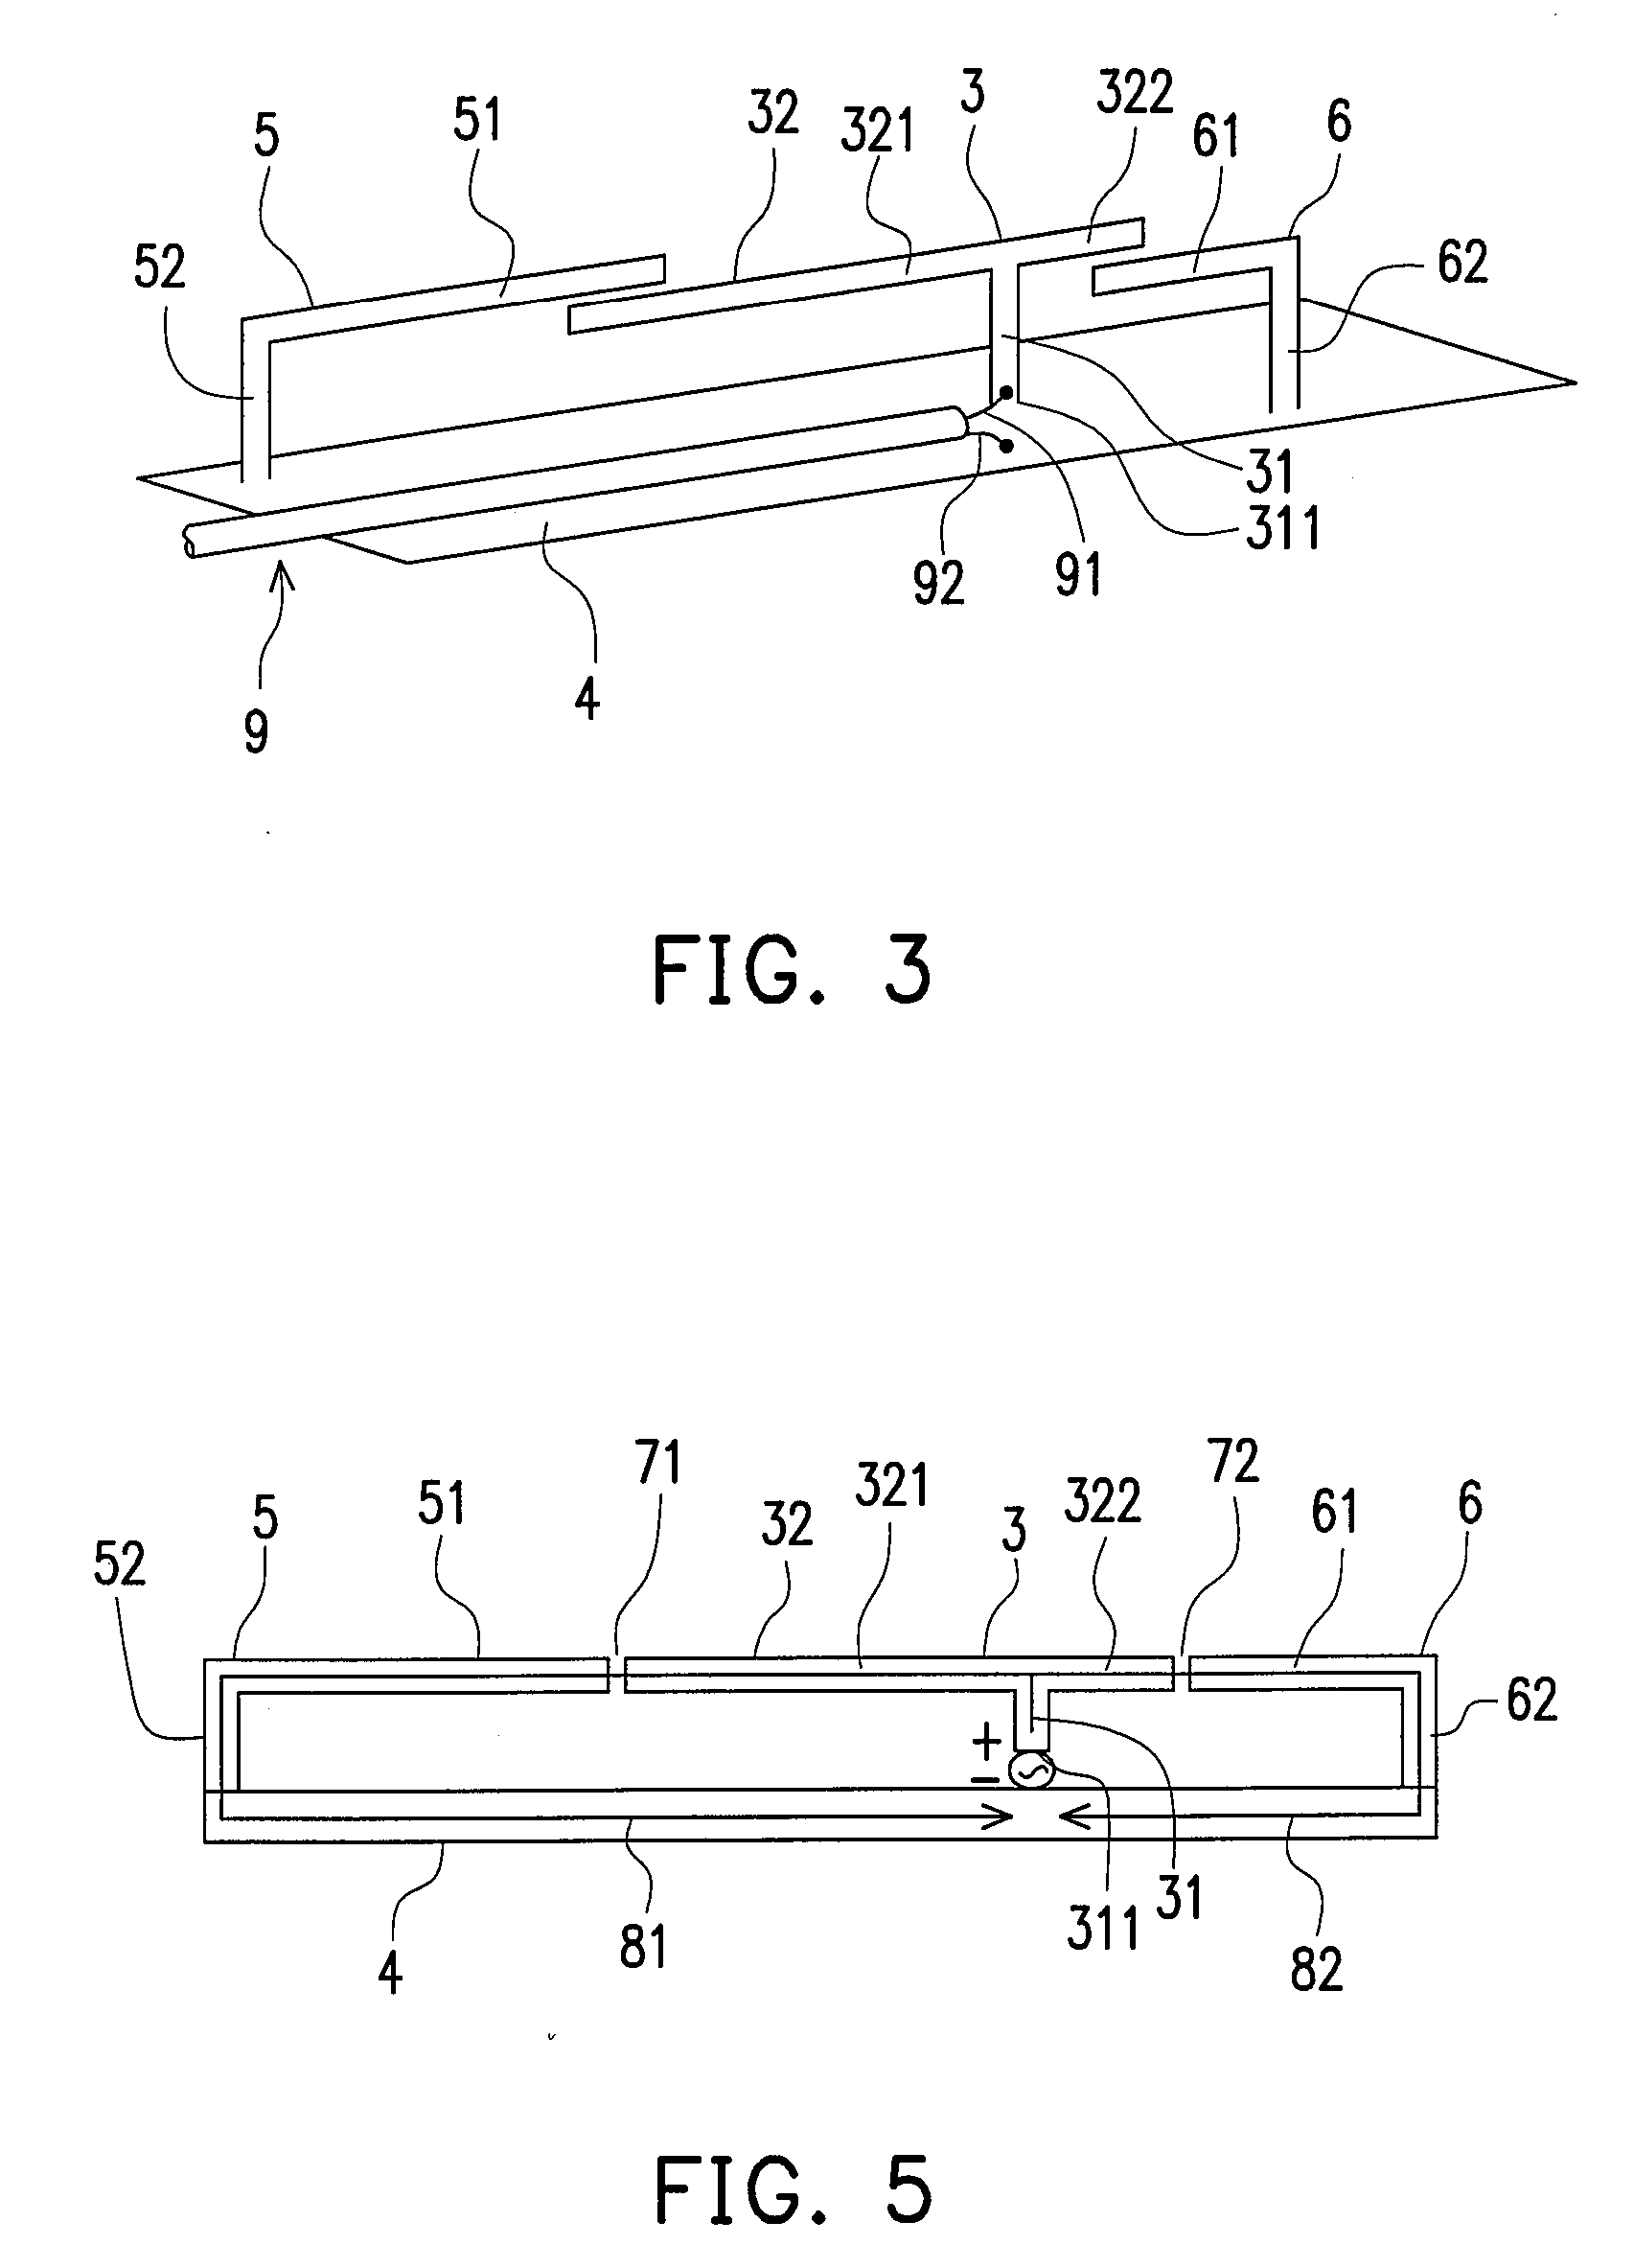 Multi-frequency antenna with dual loops